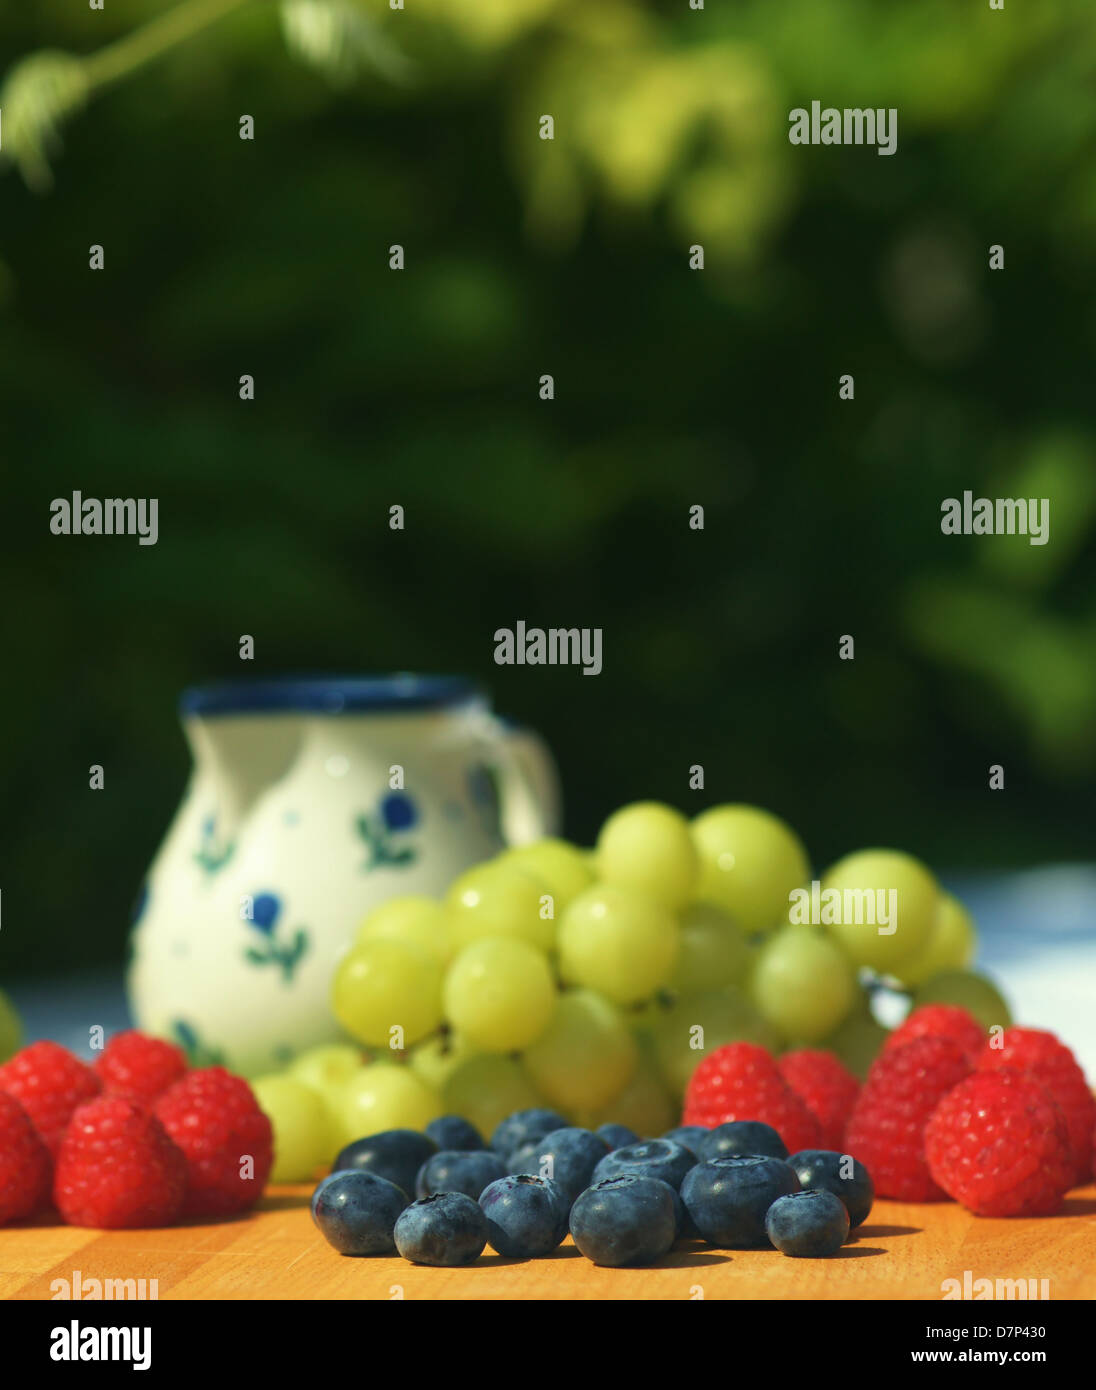 Fresh blueberries, raspberries and grapes on a garden table. Focus on blueberries Stock Photo